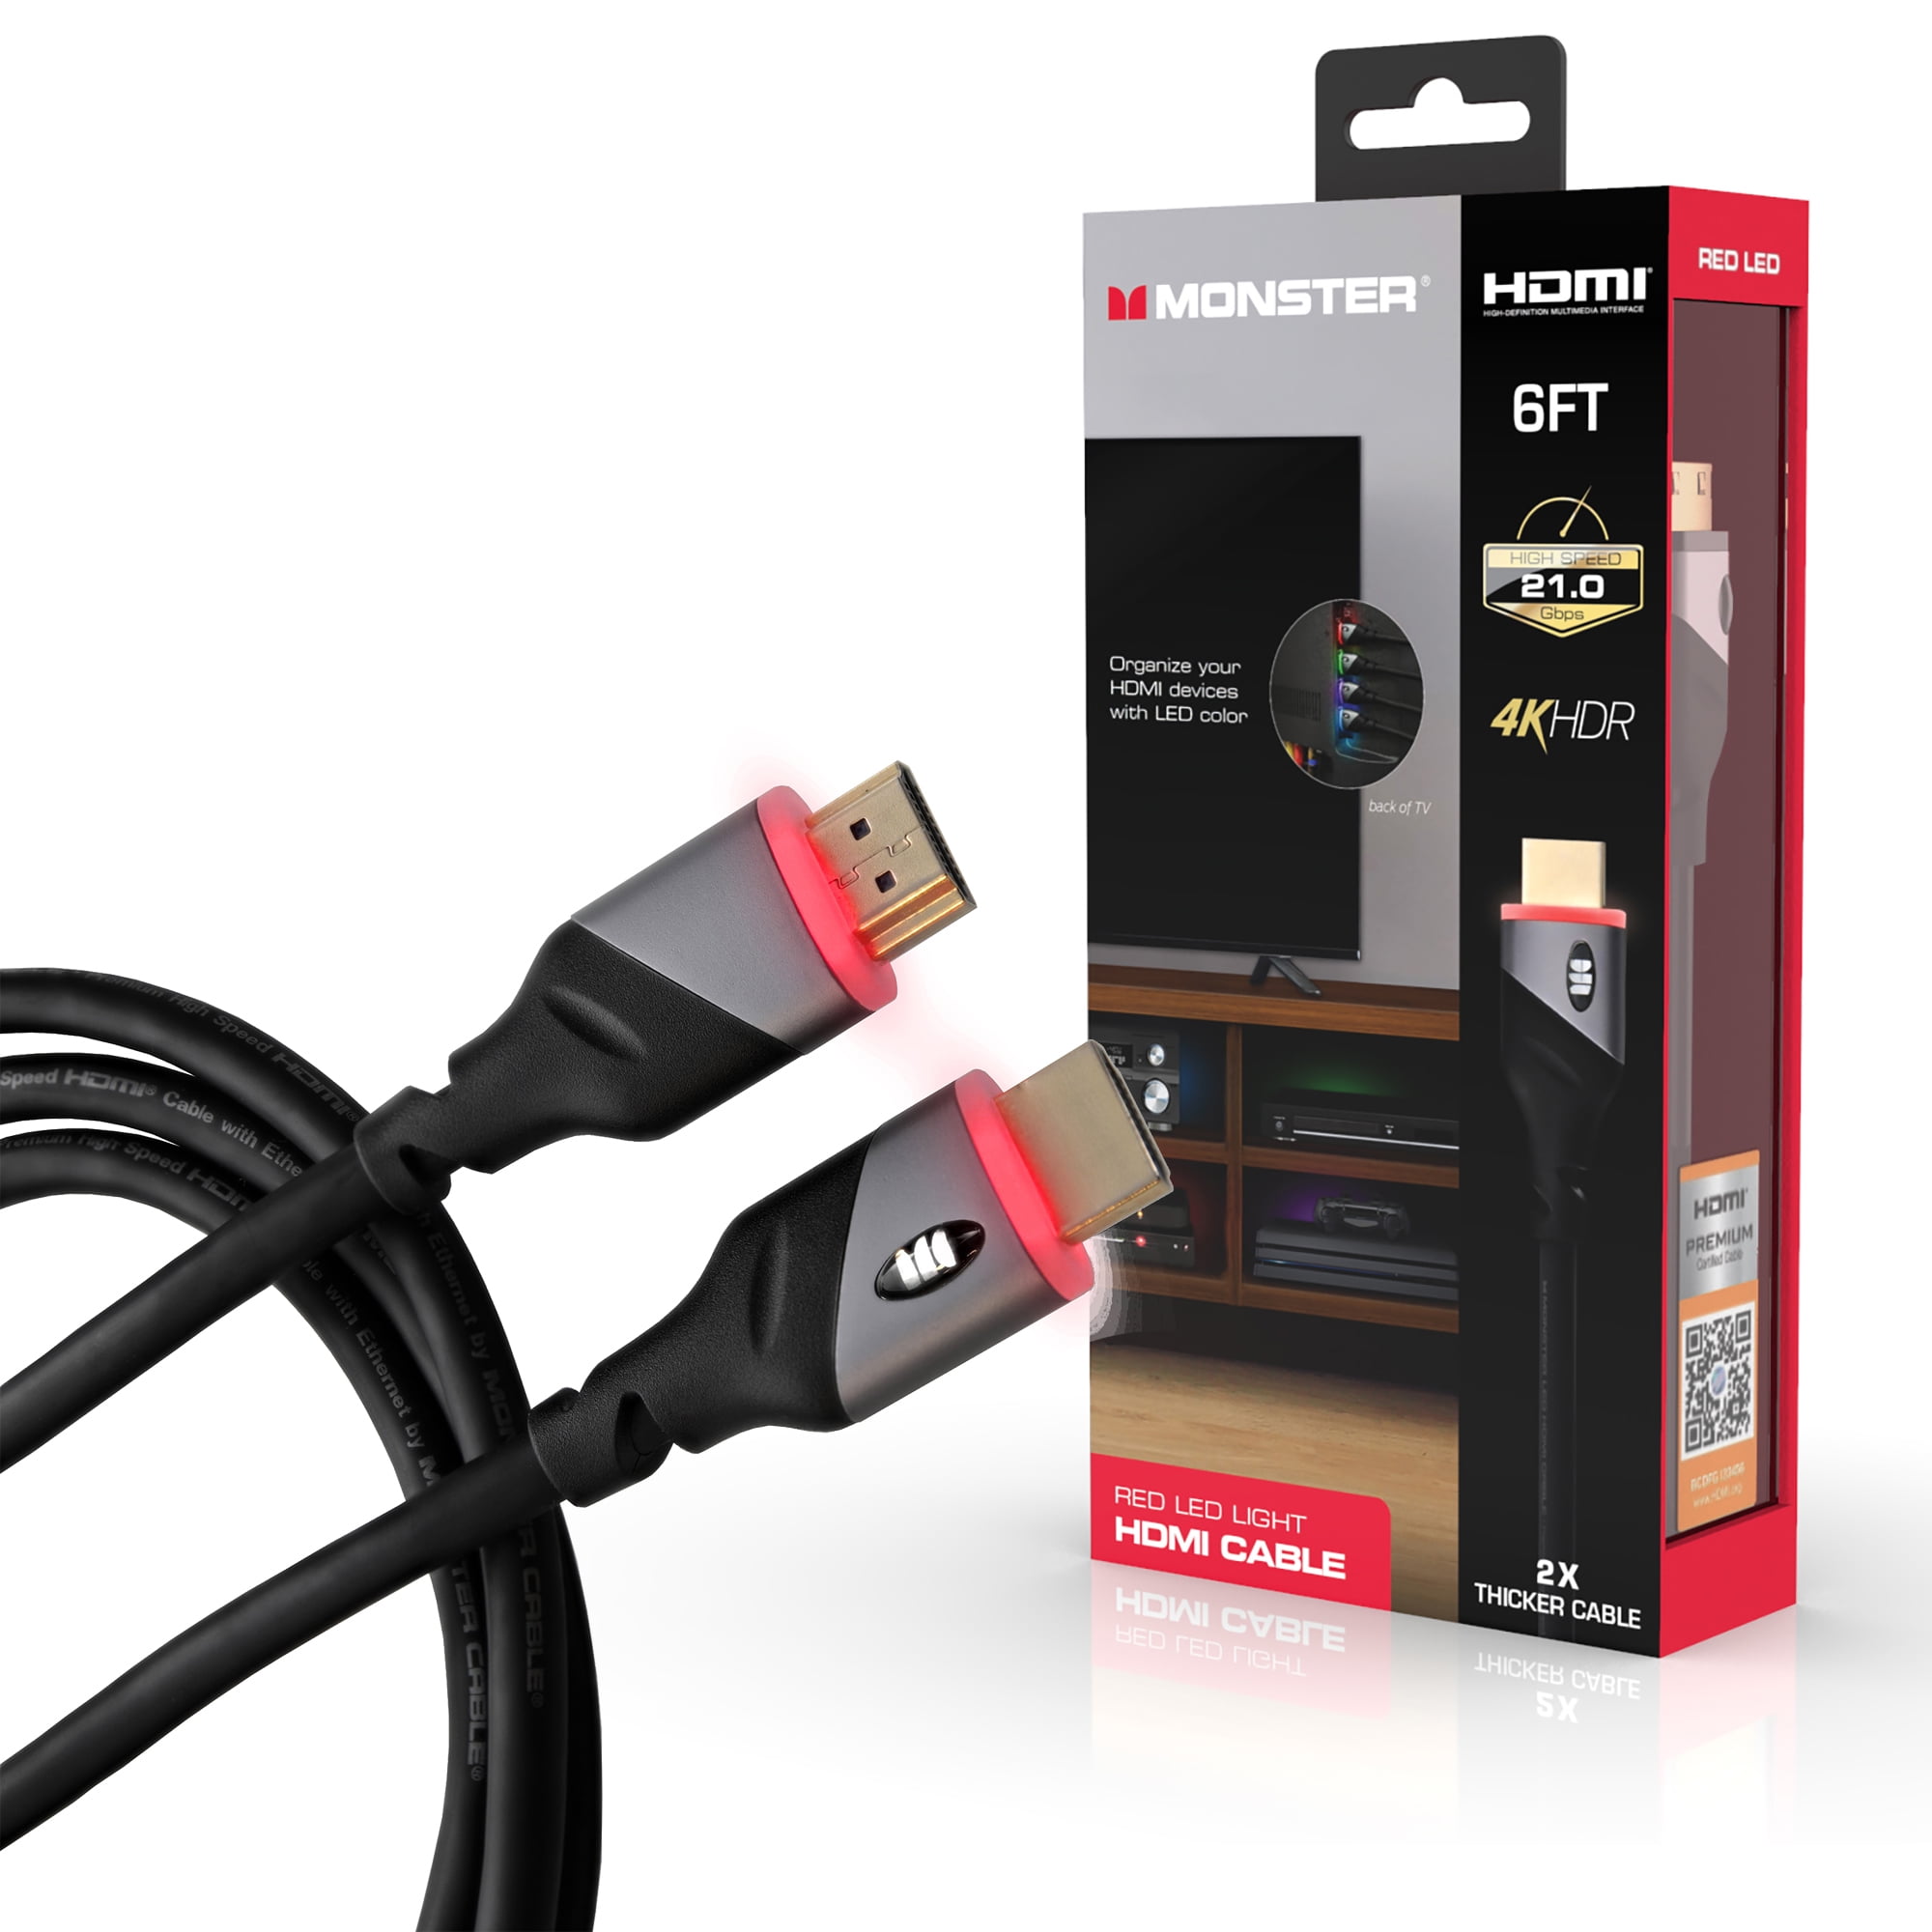 Cable Matters 3-Pack High Speed HDMI Cable 6 ft with 4K @60Hz, 2K @144Hz,  FreeSync, G-SYNC and HDR Support for Gaming Monitor, PC, Apple TV, and More  